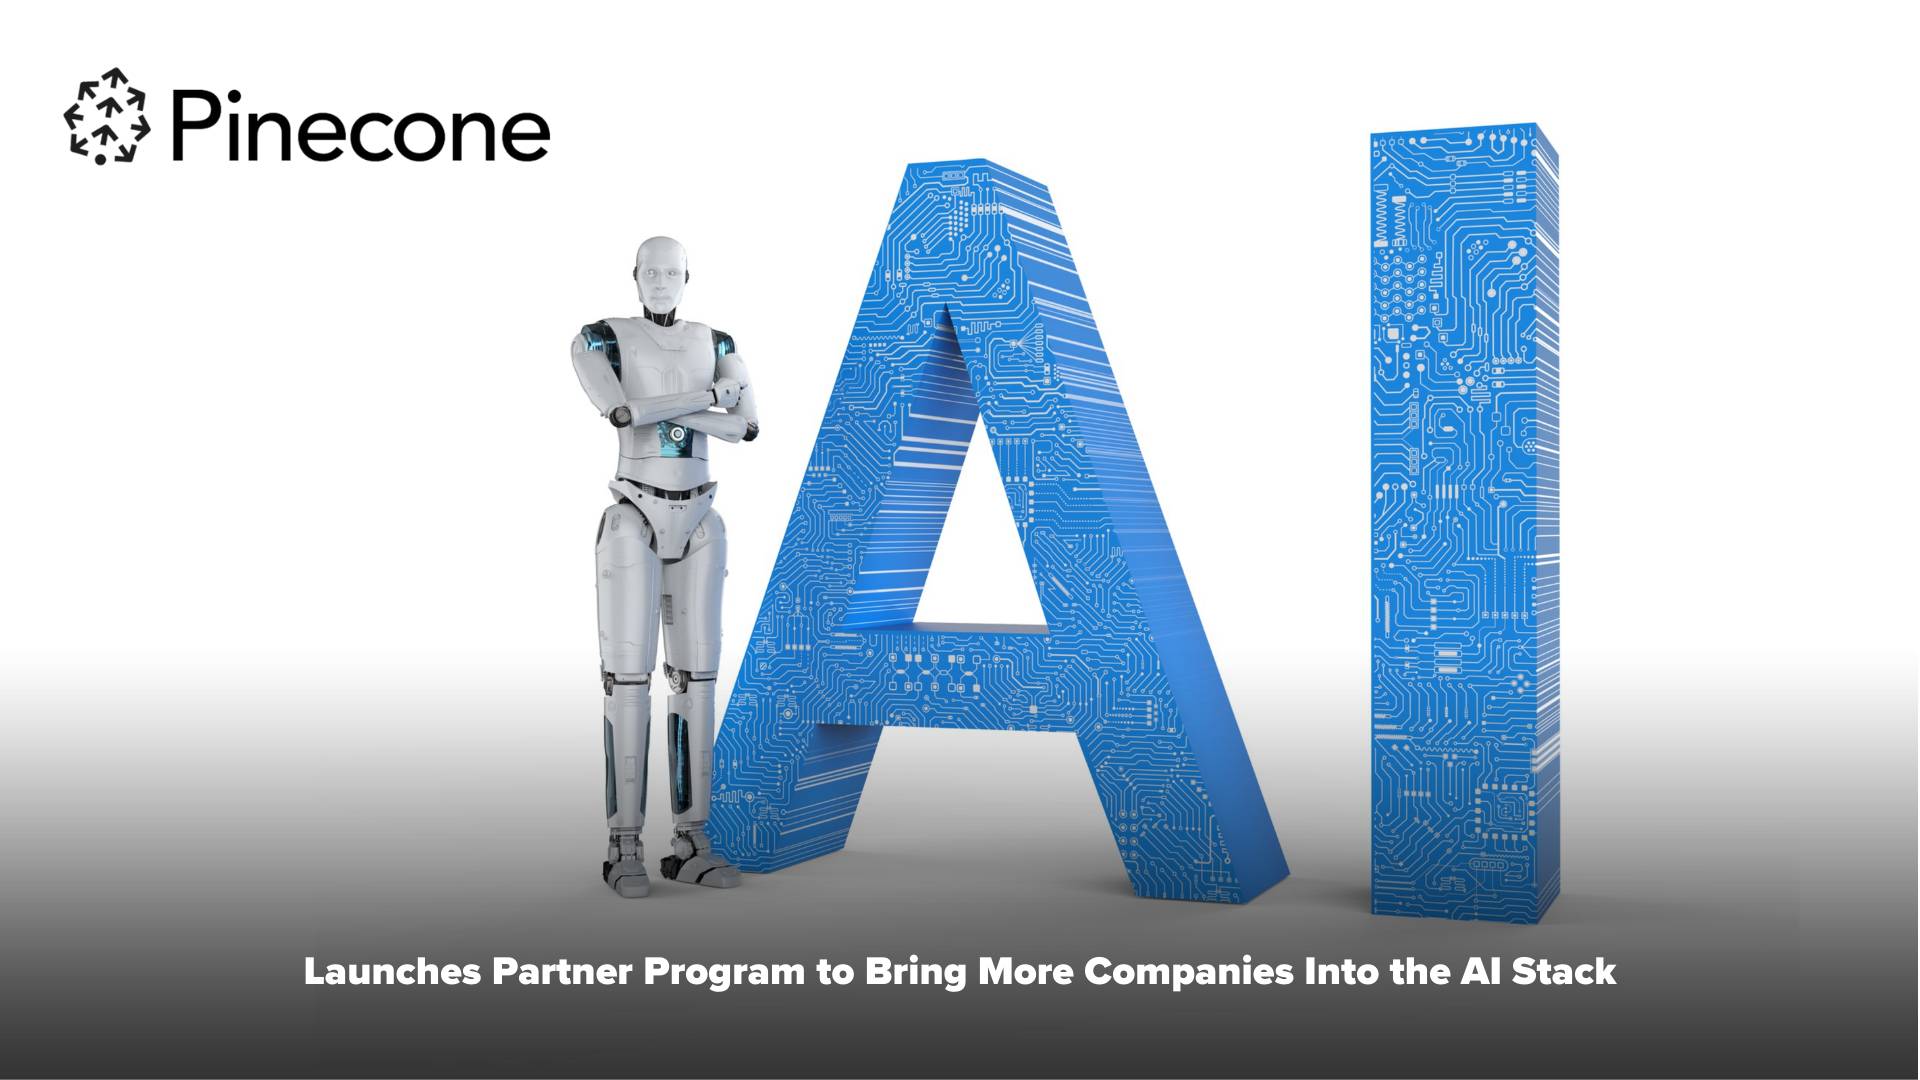 Pinecone Launches Partner Program to Bring More Companies Into the AI Stack